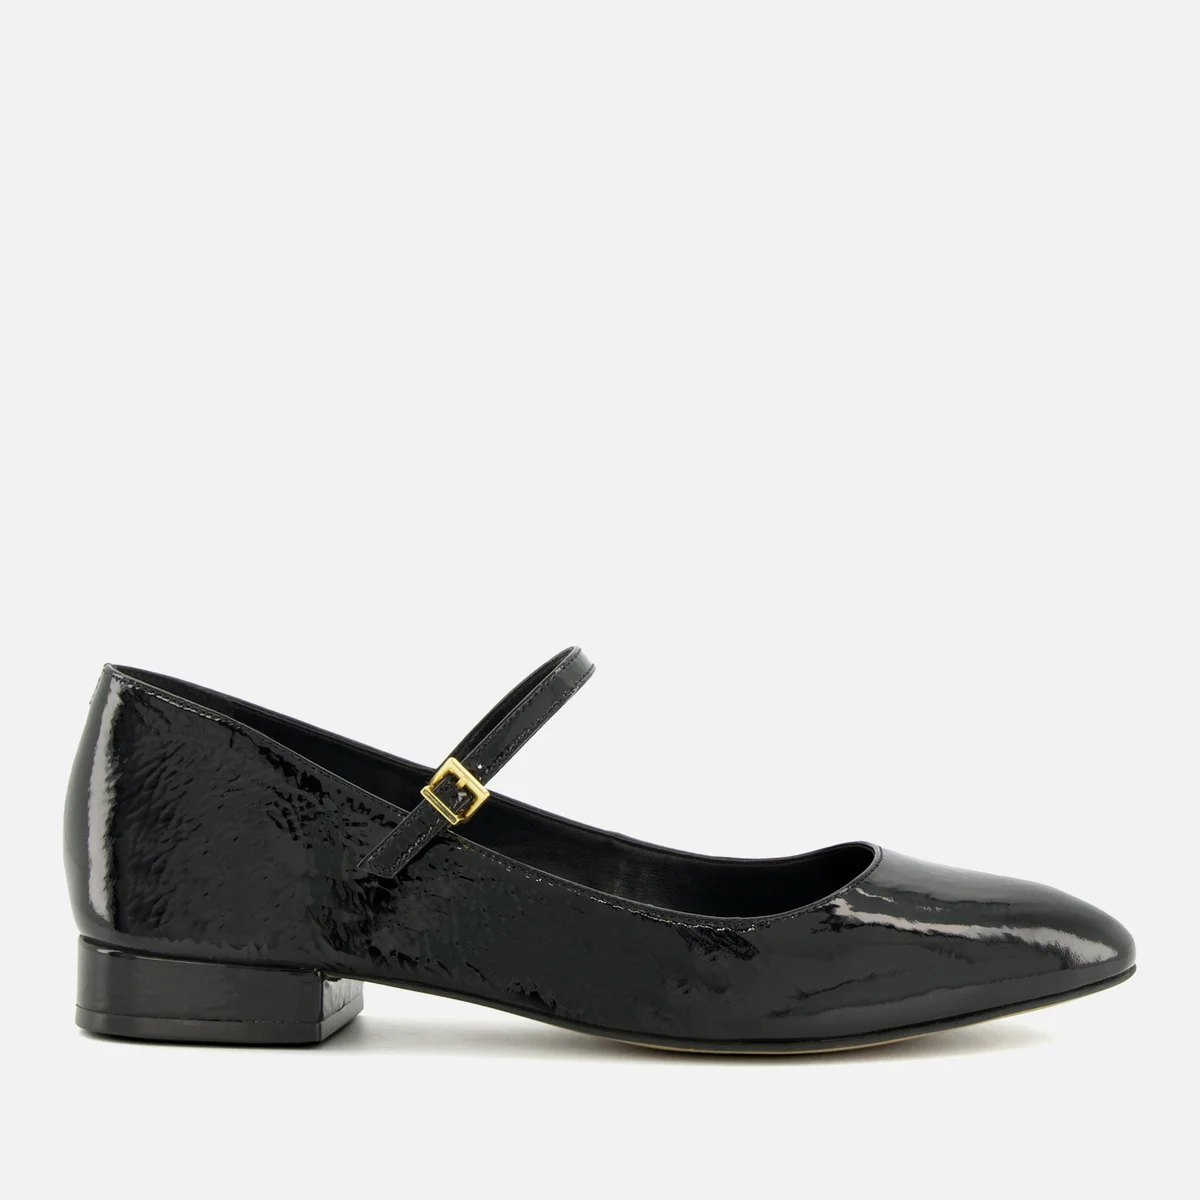 Dune Women's Hipplie Patent-Leather Mary Jane Flats Image 1